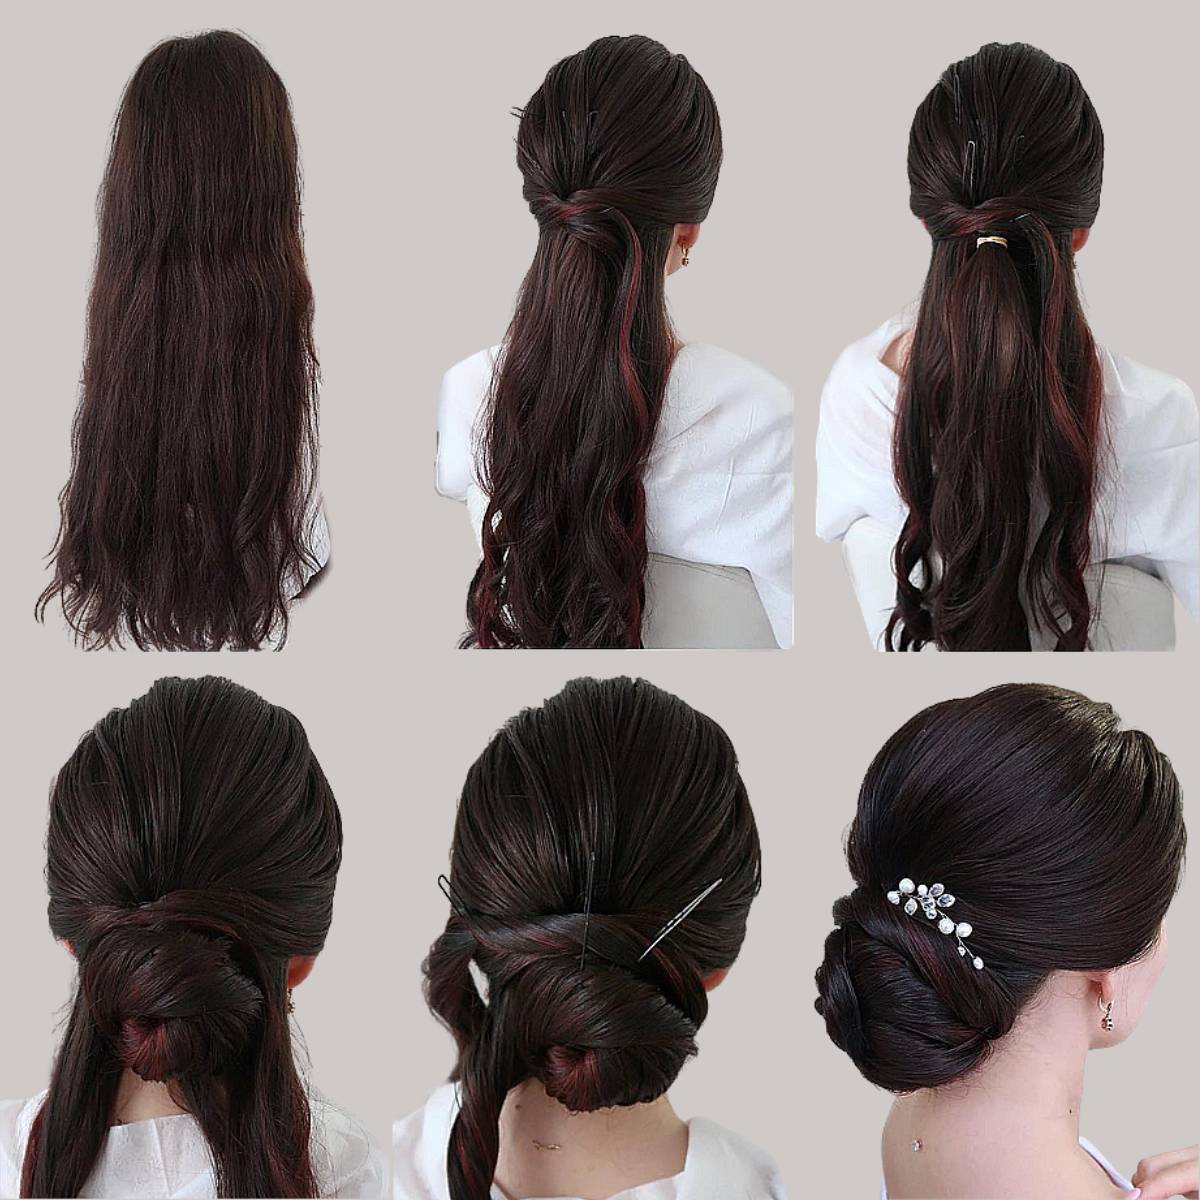 Chic & Easy: 5 Styles of Updo Hair Extensions for You